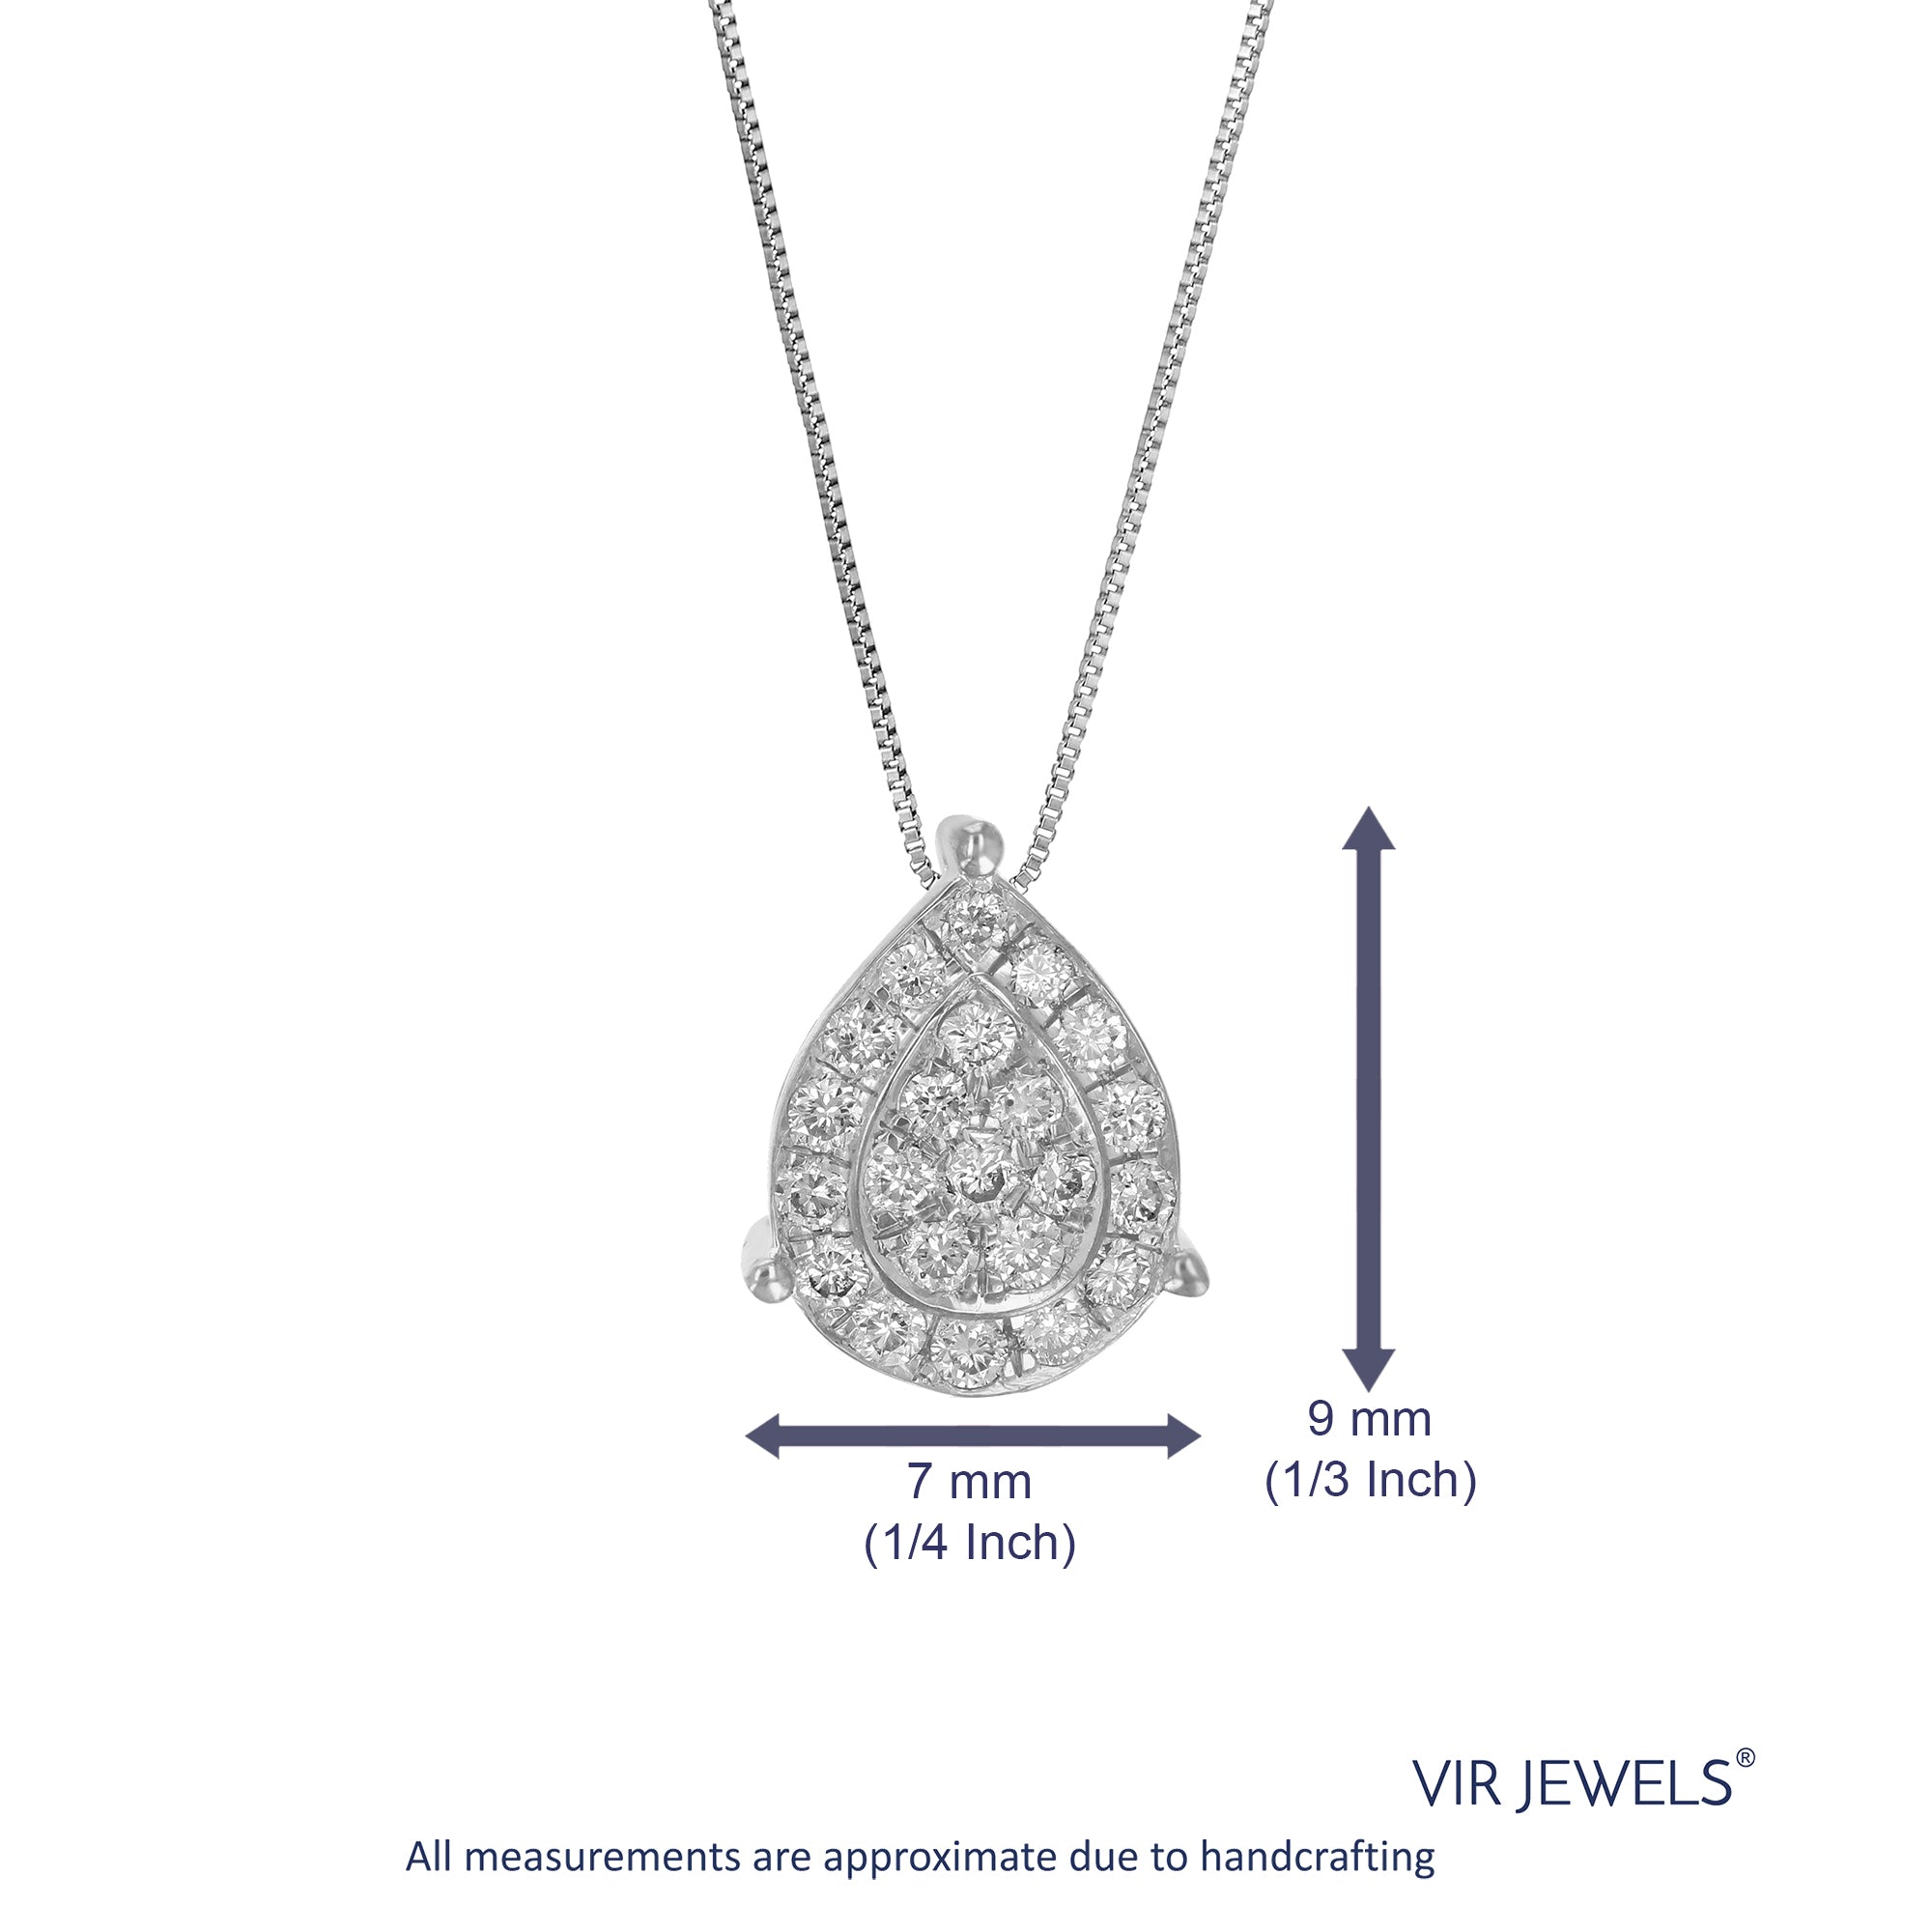 Large Pear-shaped Champaign Diamond Necklace